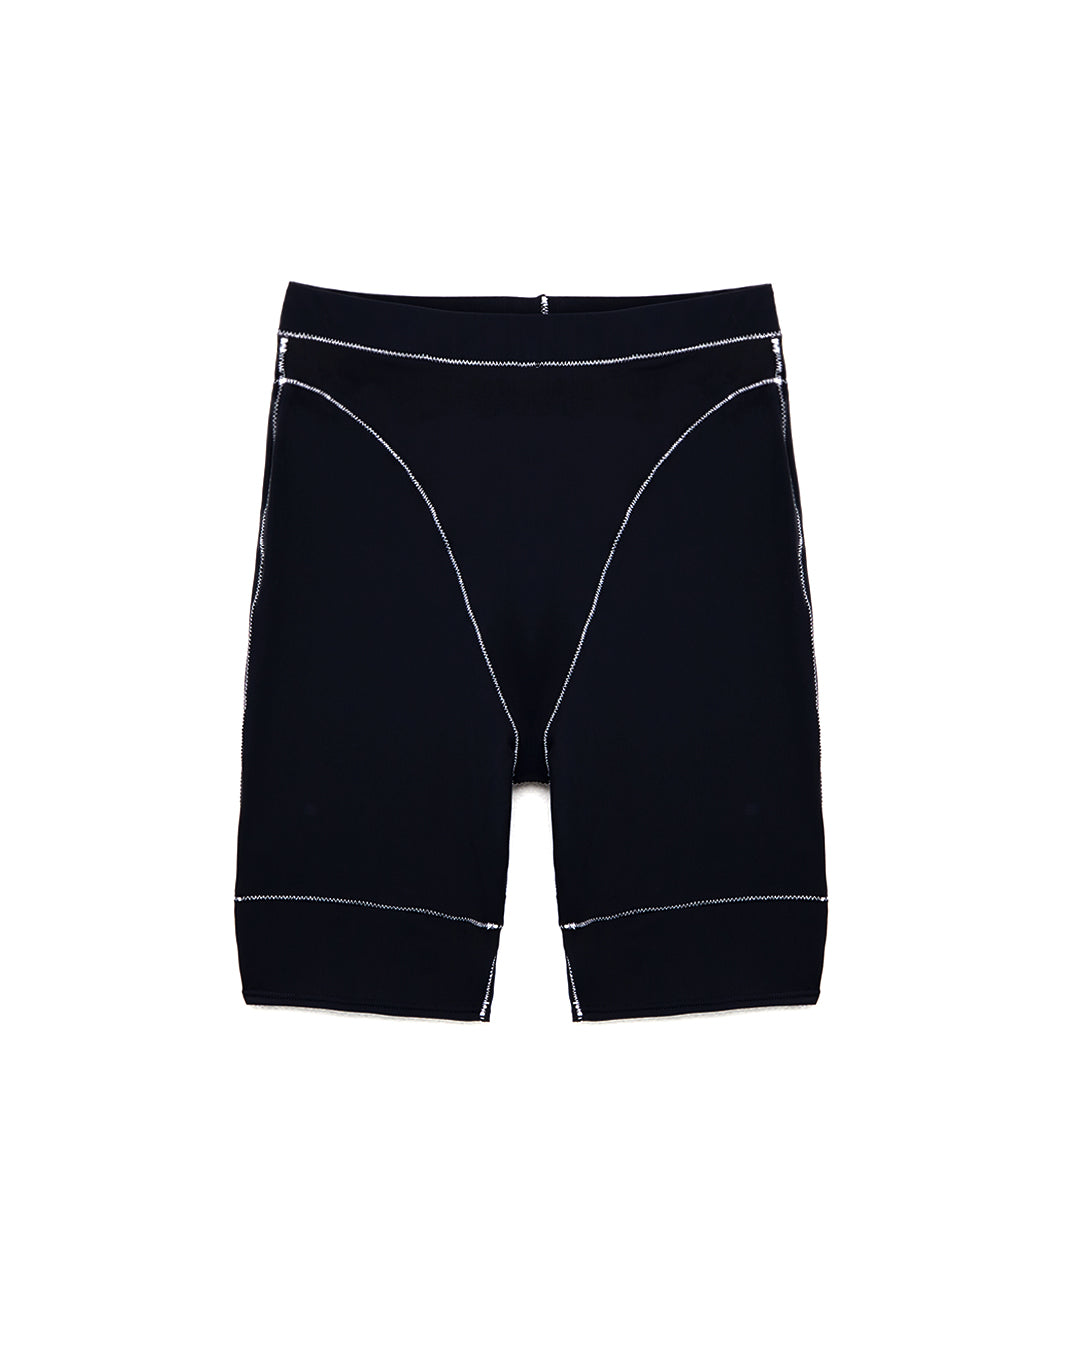 BRB - Fitness Bike Shorts - Black - Error404store. Black bike shorts with white contrast stitching, made by independent Australian designer BRB. Sold in Melbourne clothing boutique called Error404store.